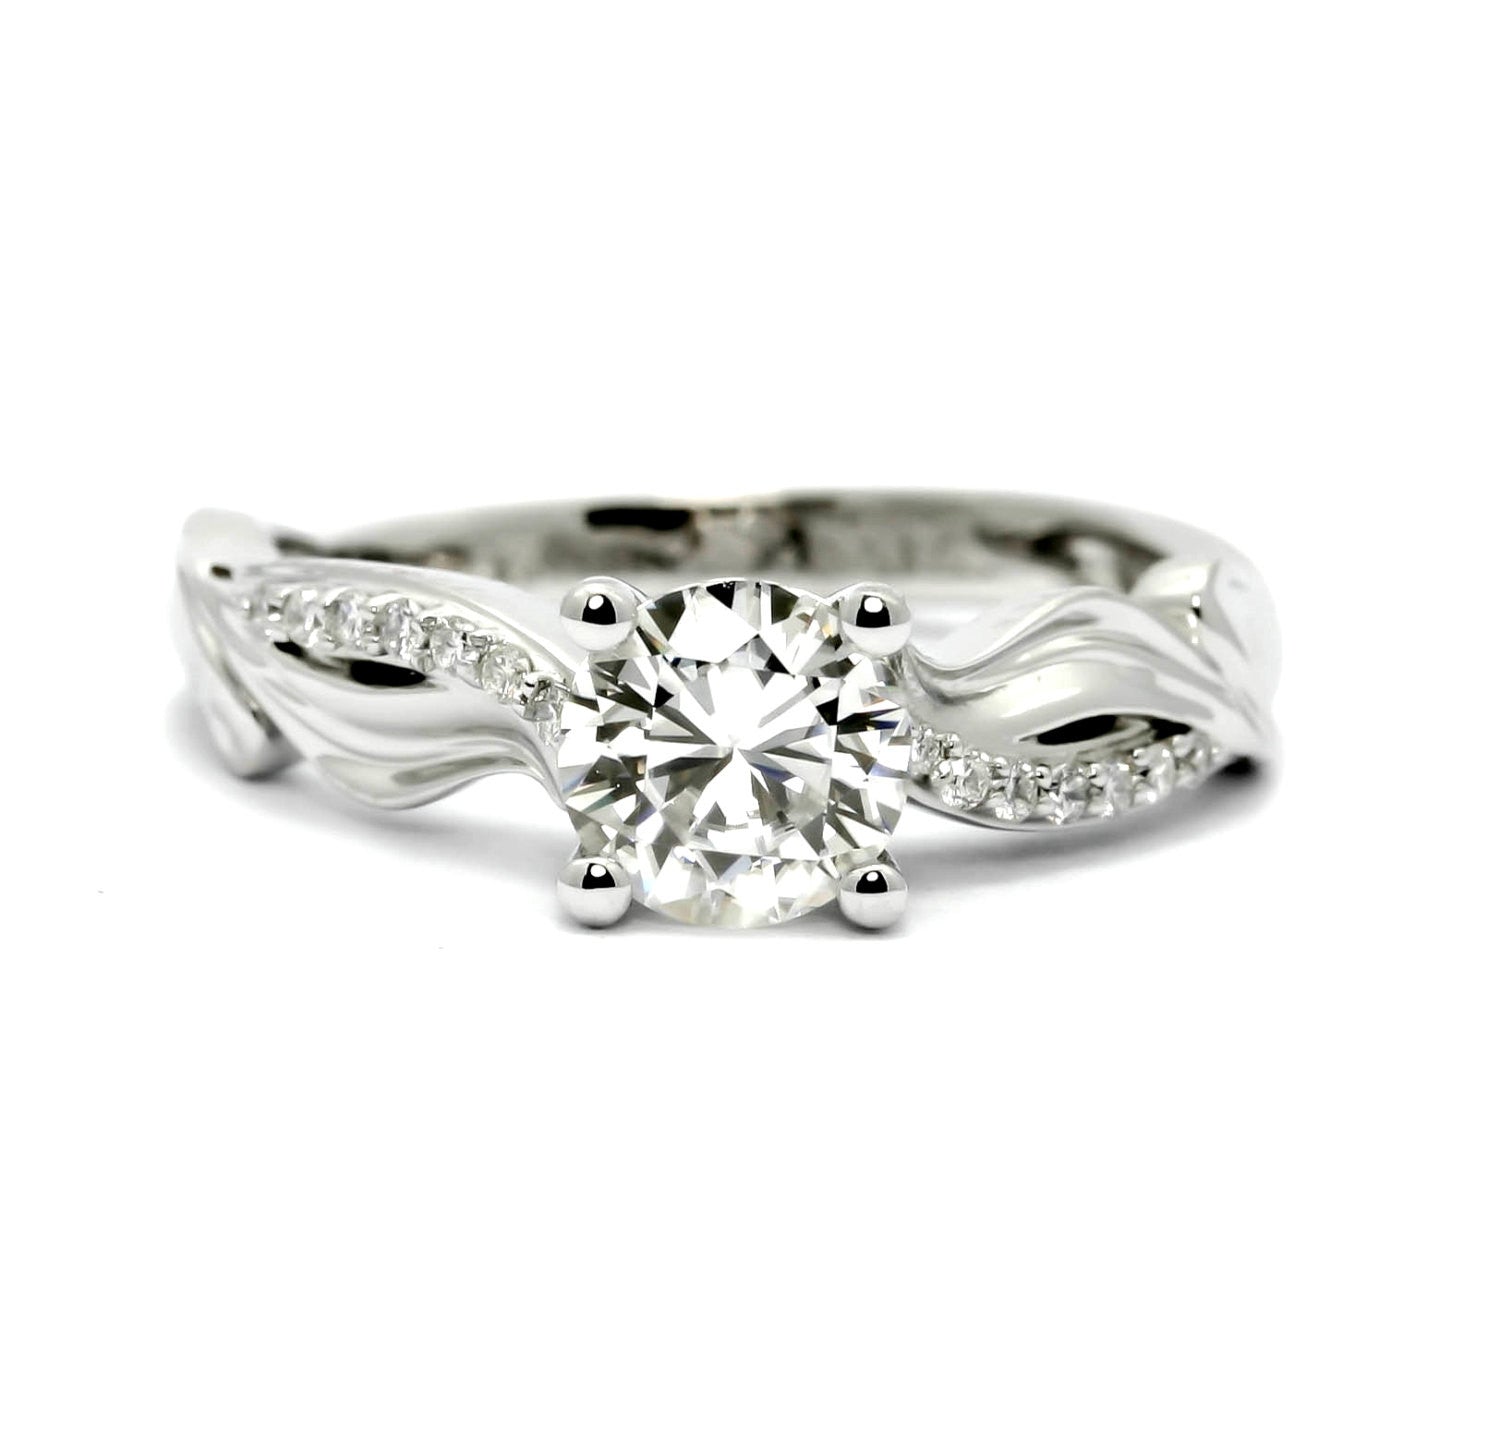 Semi Mount,Unique Diamond Engagement Ring For 1 Carat Center Stone, With 0.09 Carats Of Diamonds, Anniversary Ring - Y11666SE